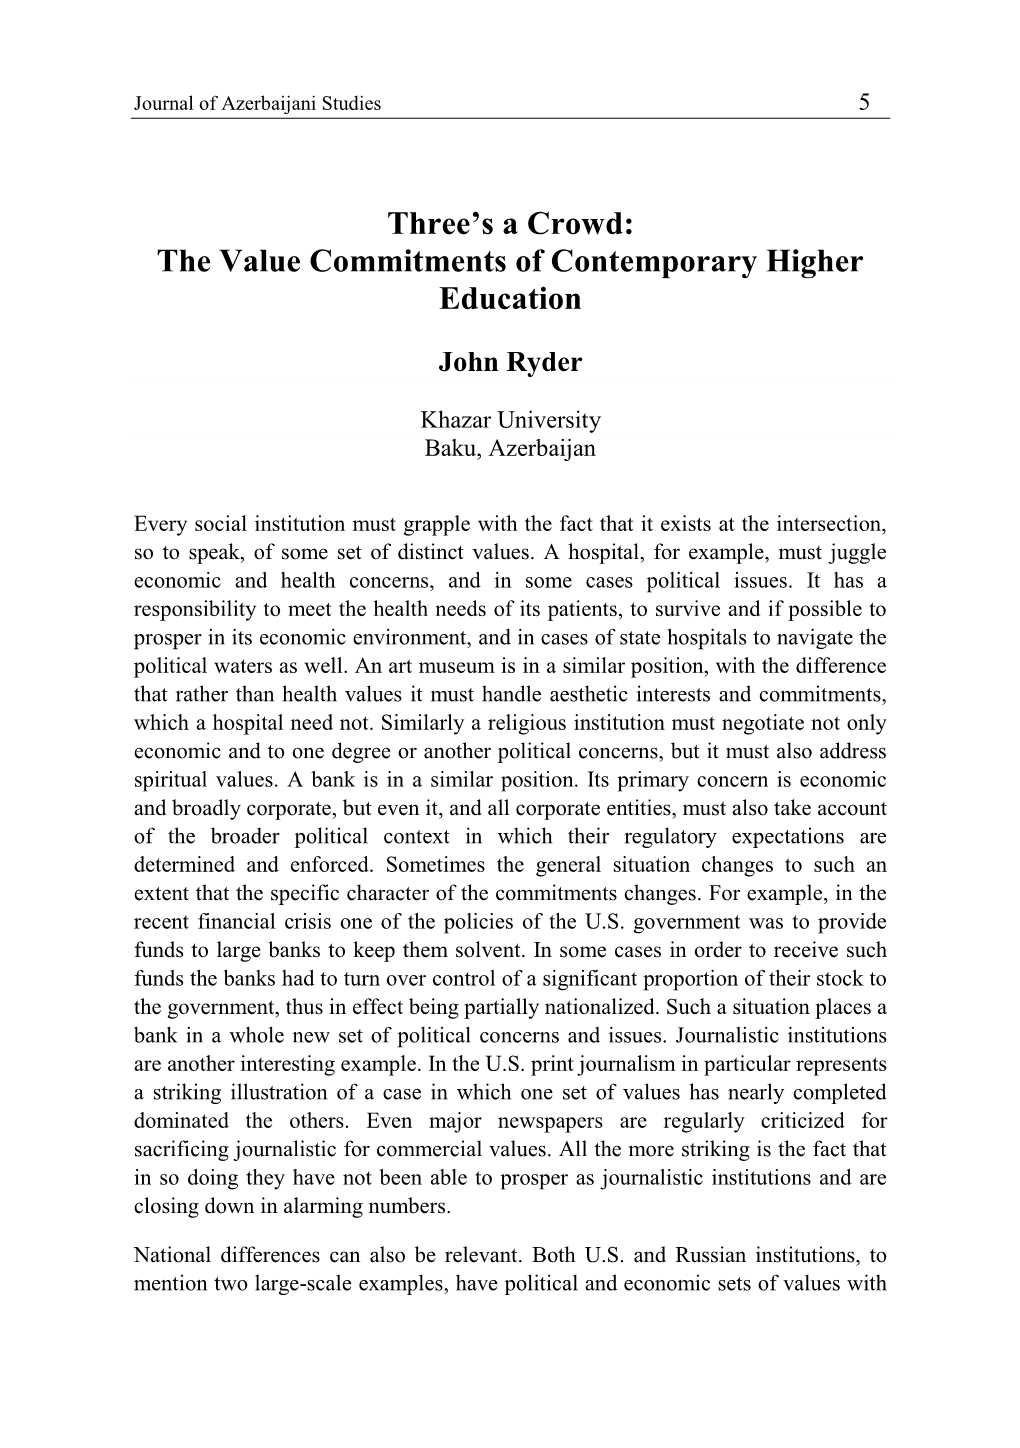 The Value Commitments of Contemporary Higher Education